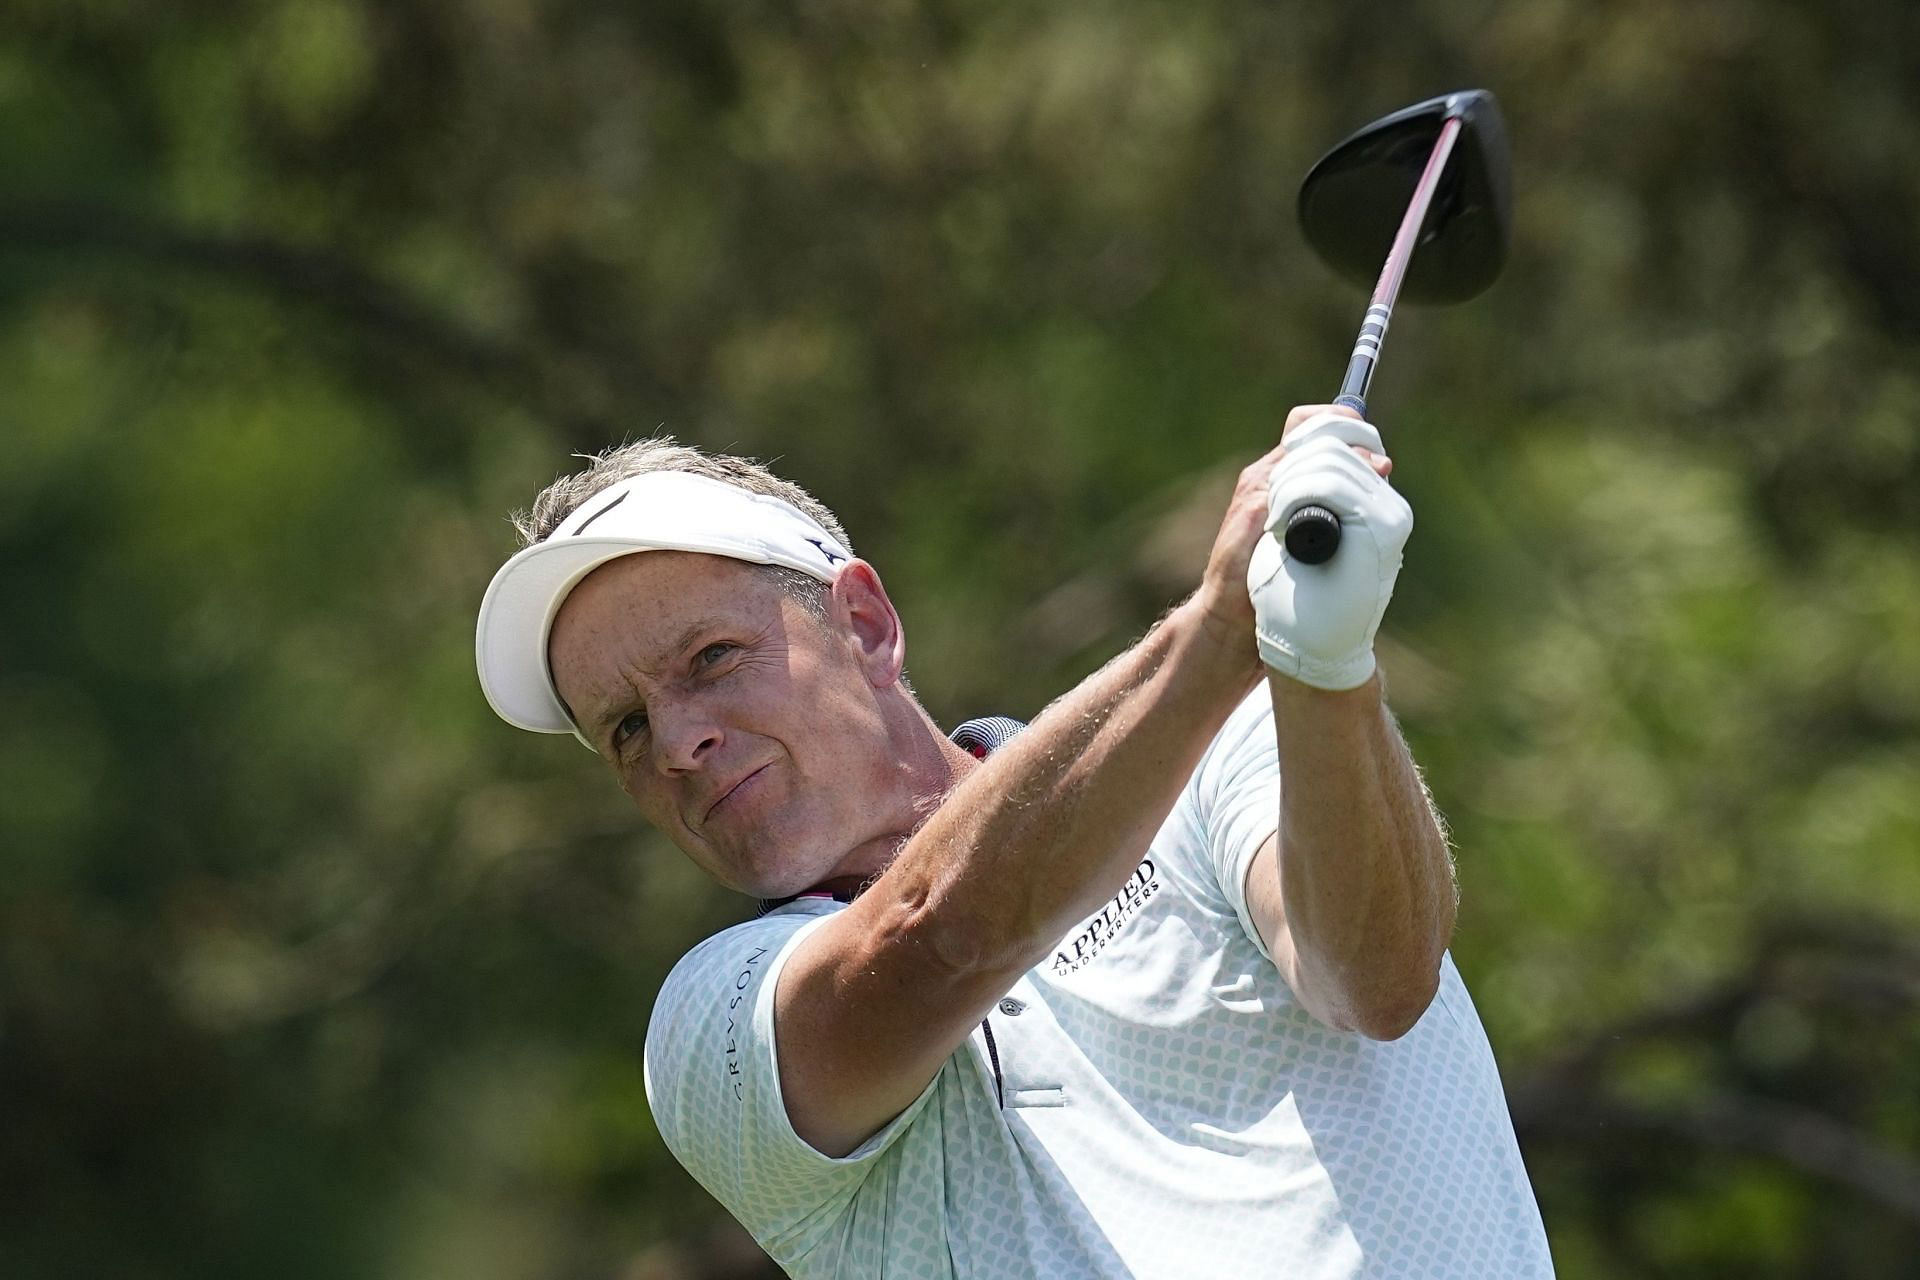 How to watch Luke Donald's Europe Ryder Cup Captain's picks